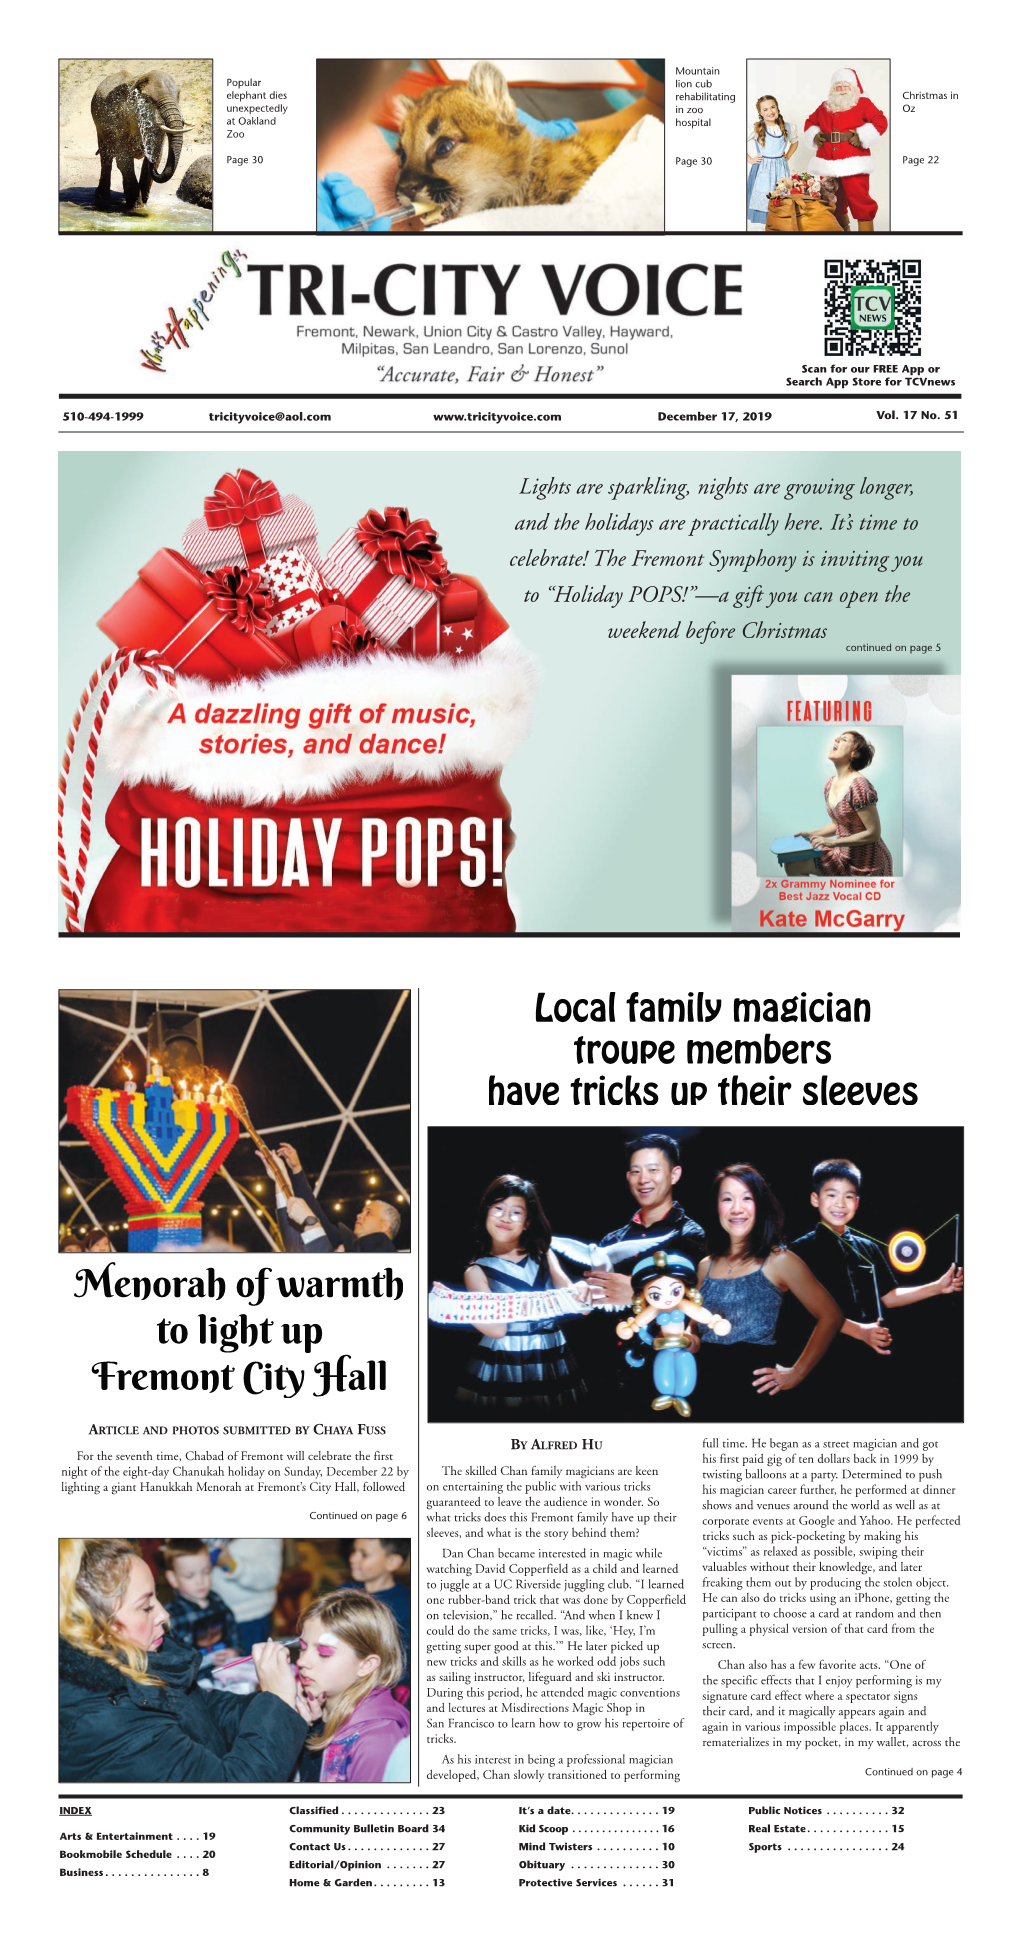 The Fremont Symphony Is Inviting You to “Holiday POPS!”—A Gift You Can Open the Weekend Before Christmas Continued on Page 5